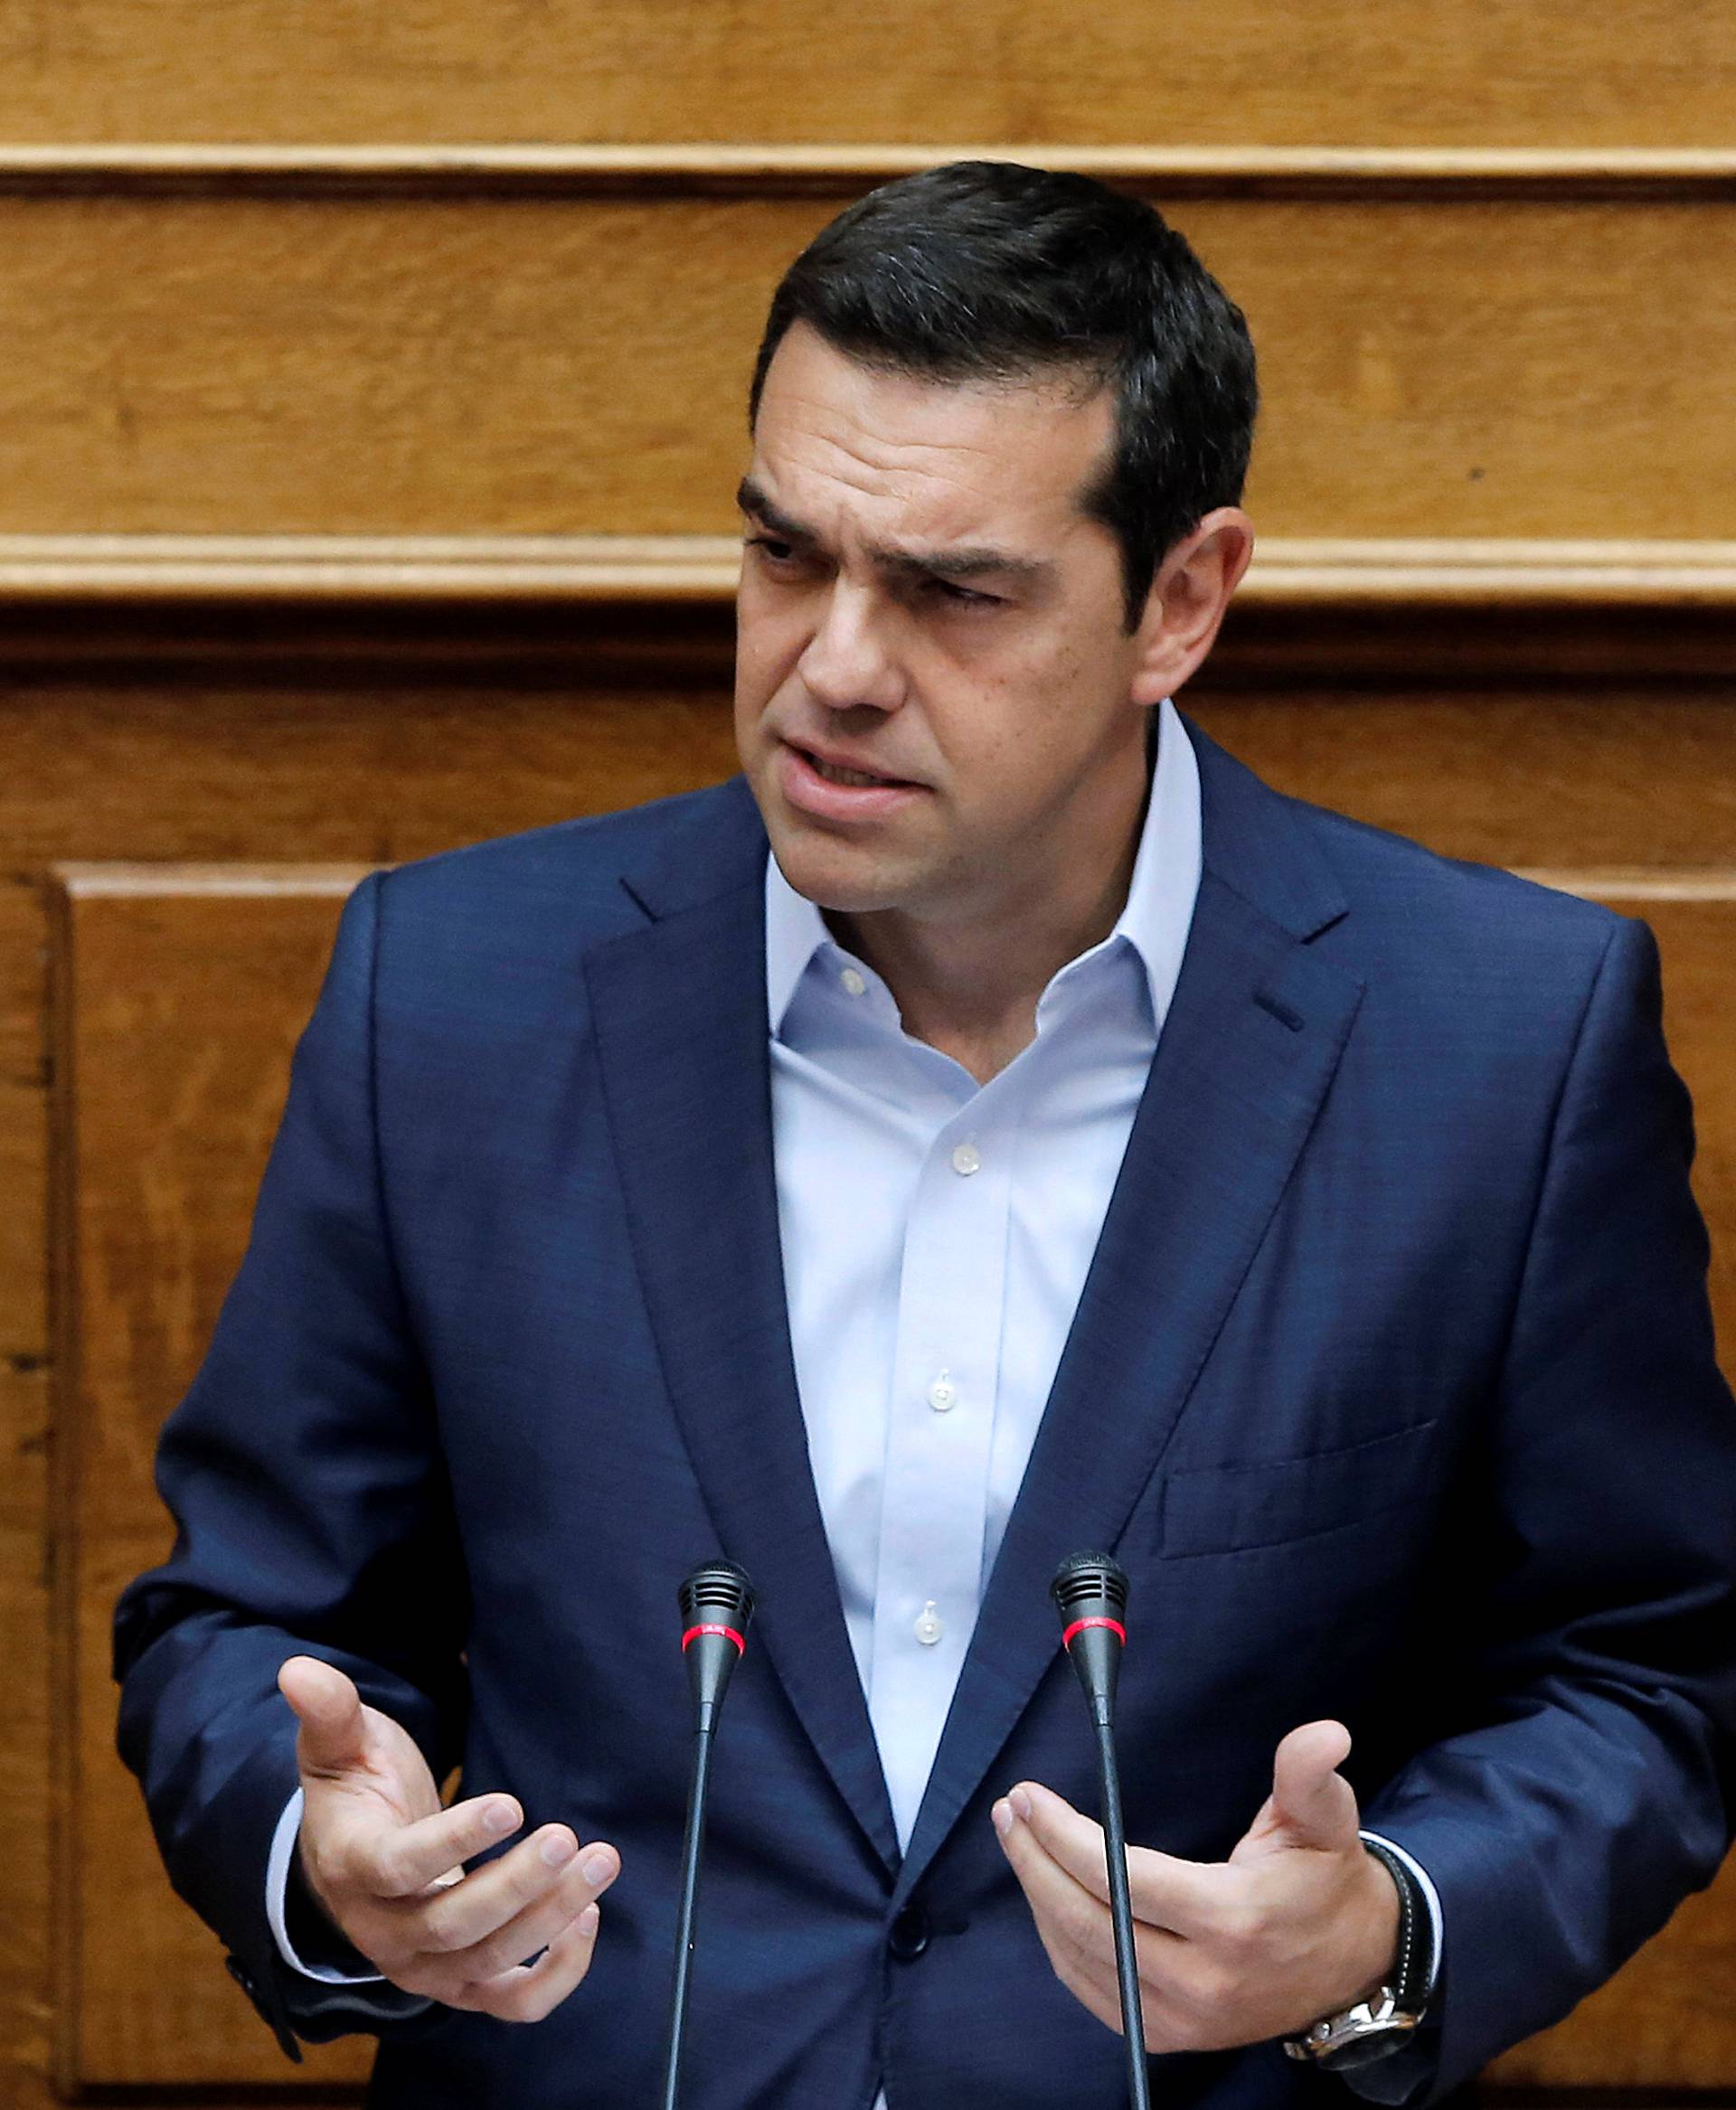 Greek Prime Minister Alexis Tsipras delivers a speech during a parliamentary session on the collapse of Cyprus peace talks in Athens